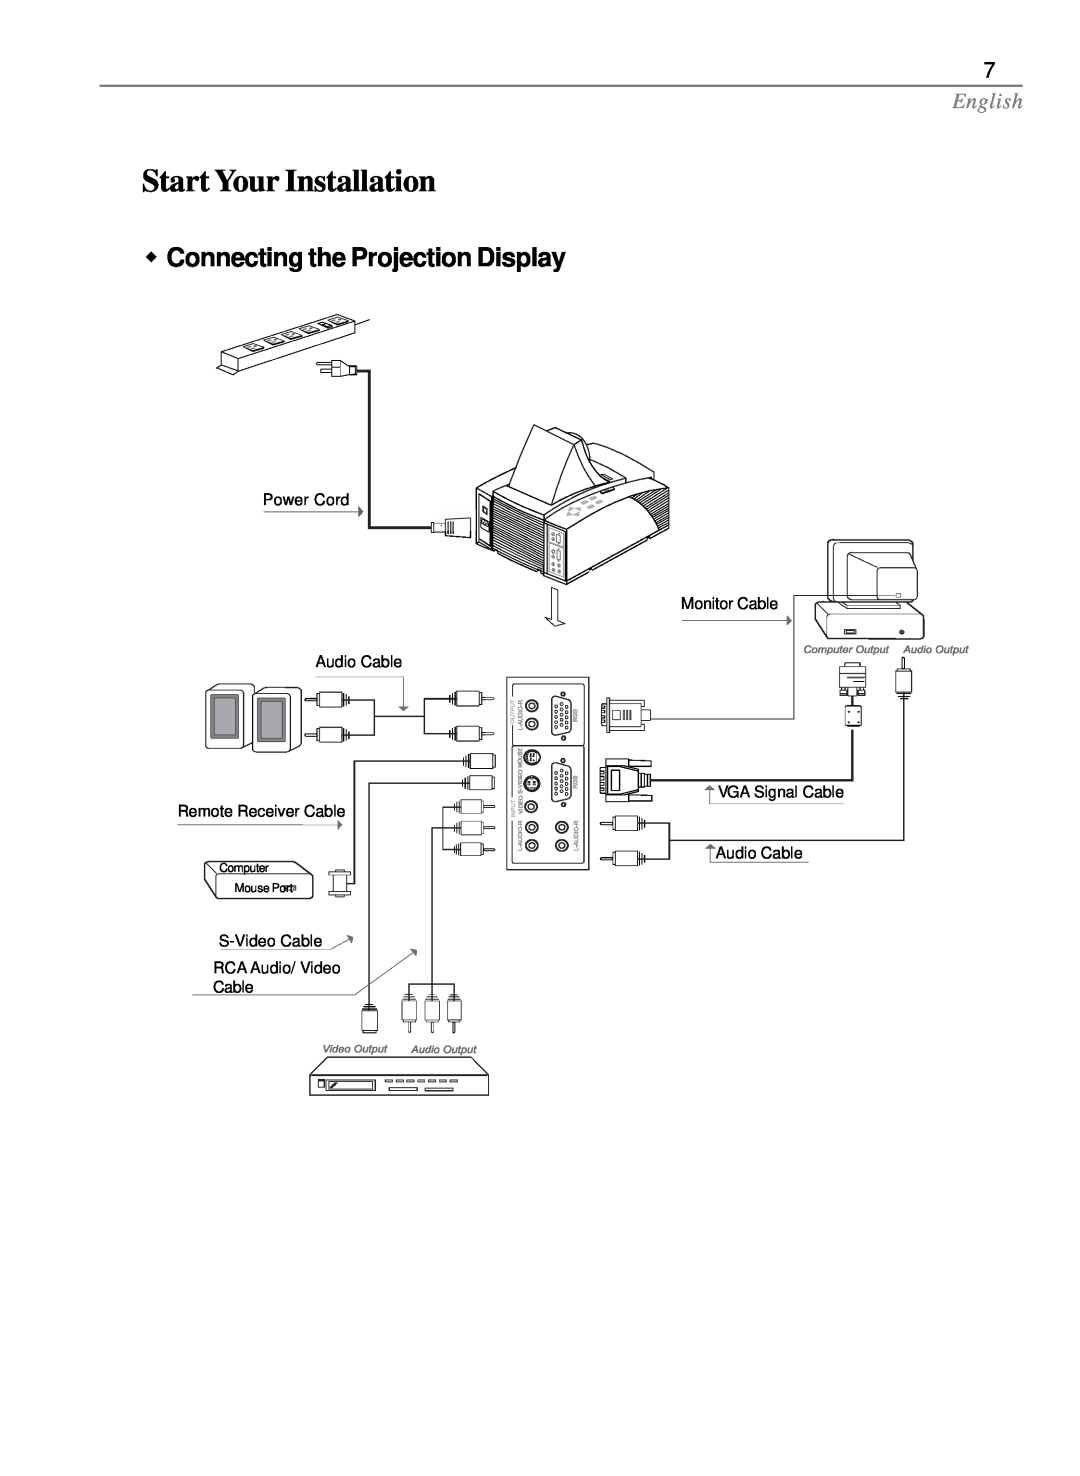 Optoma Technology EP585 Start Your Installation, w Connecting the Projection Display, English, Monitor Cable, Audio Cable 